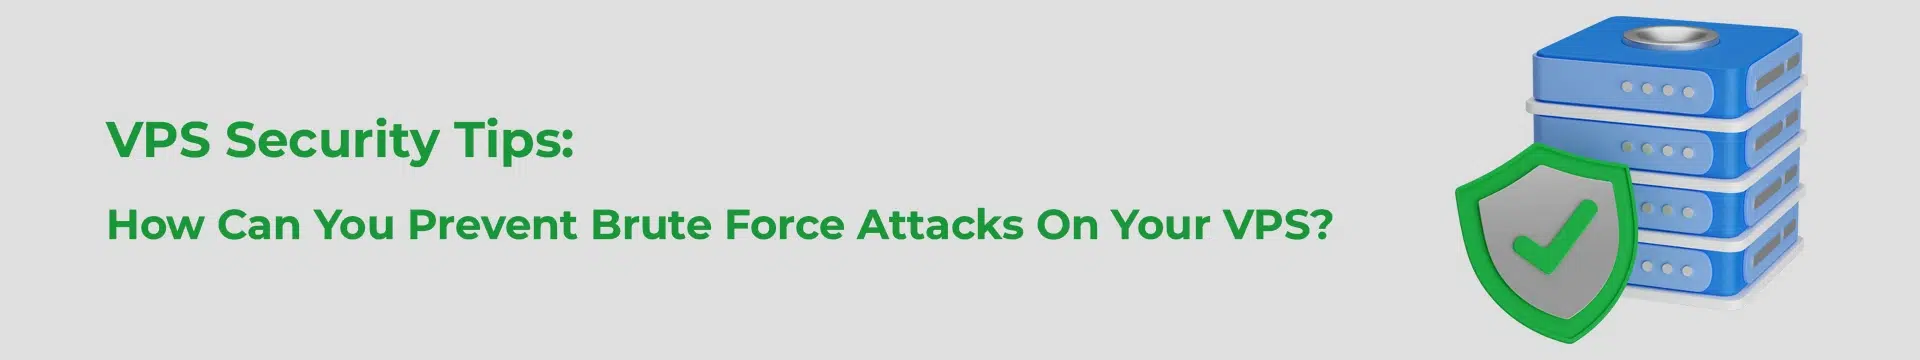 VPS Security Tips: How Can You Prevent Brute Force Attacks On Your VPS?